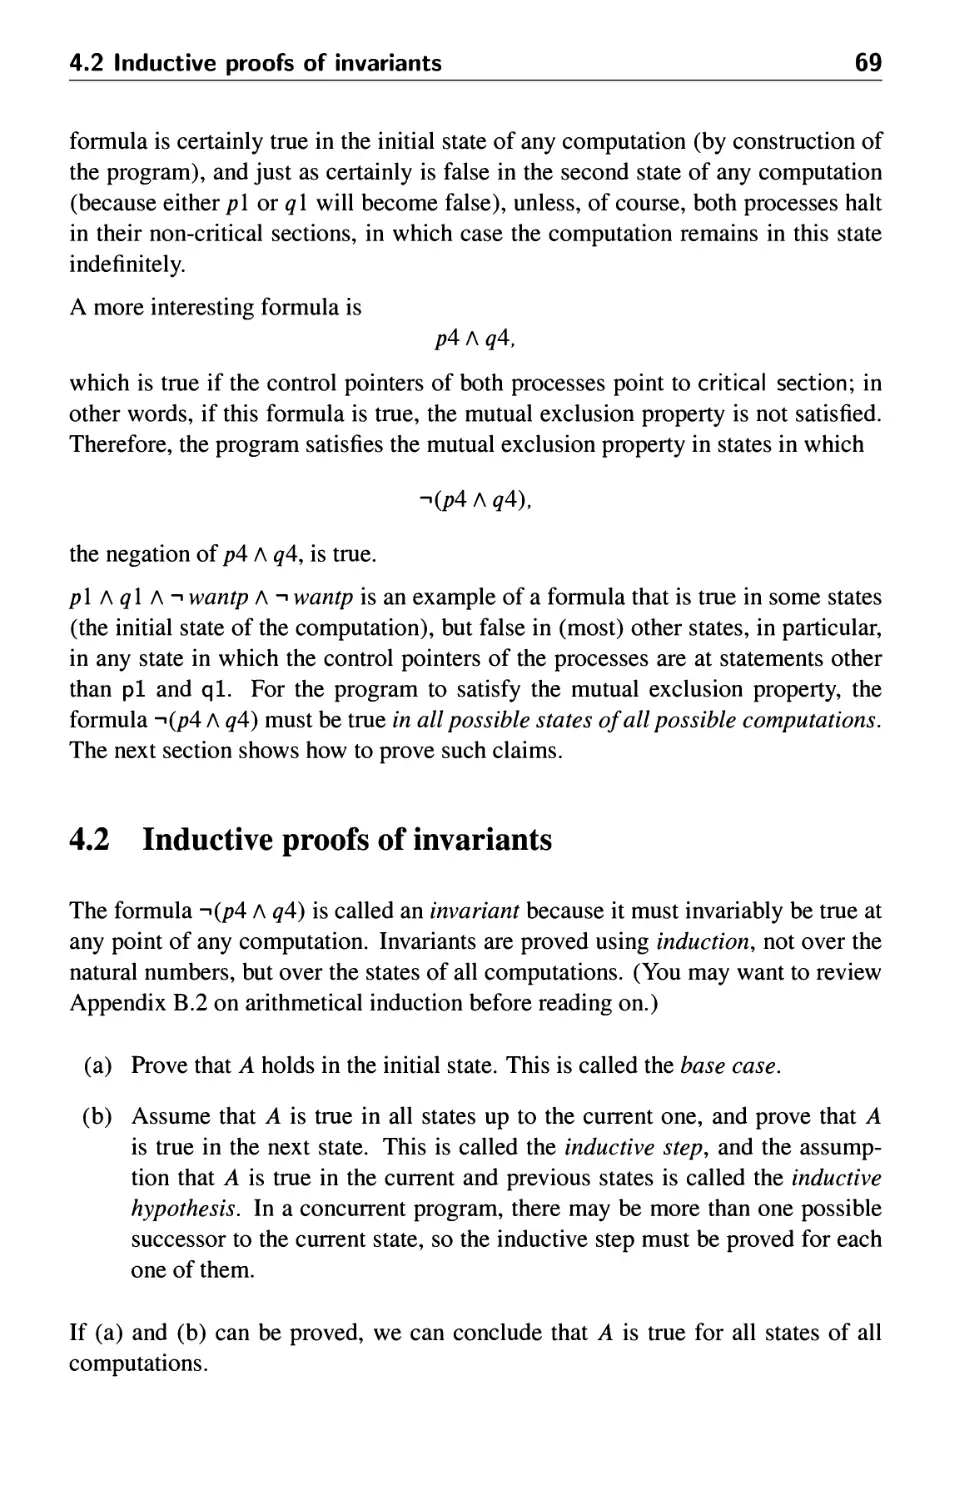 4.2 Inductive proofs of invariants